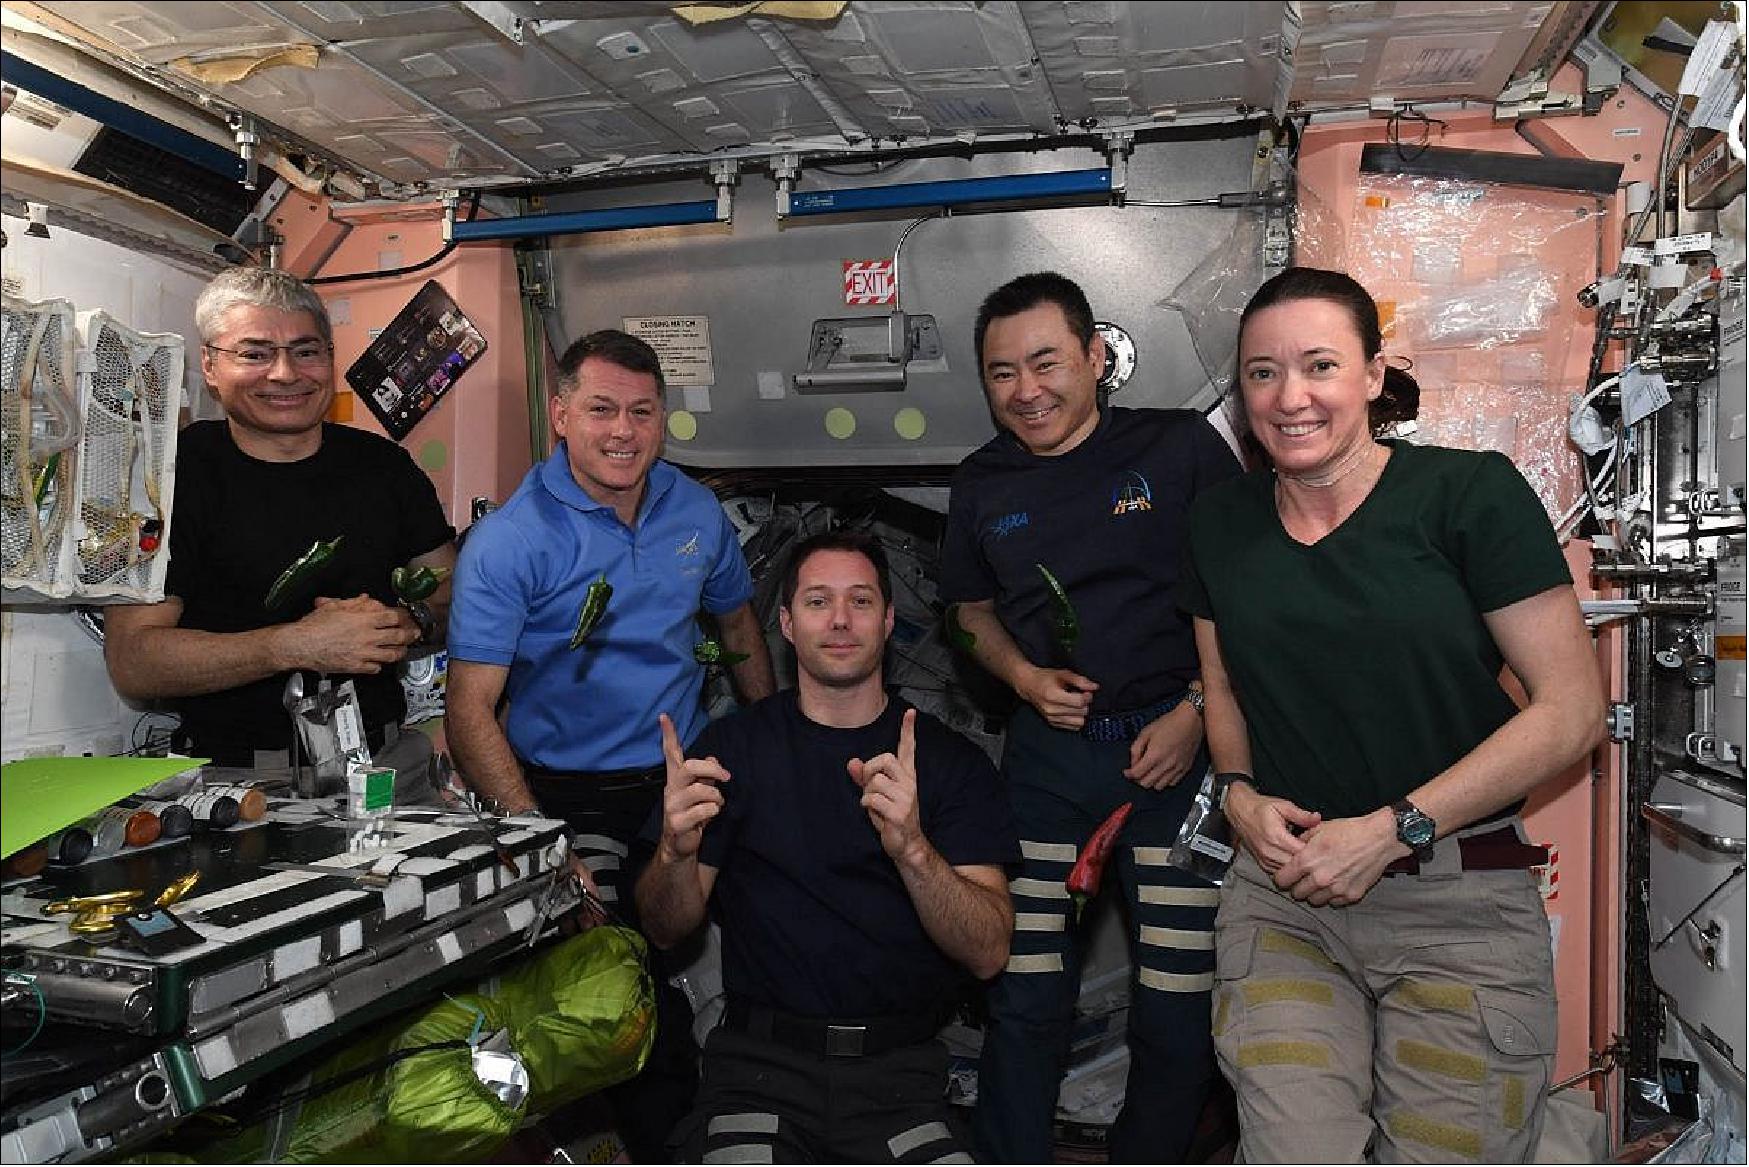 Figure 17: NASA's SpaceX Crew-2 astronauts Shane Kimbrough (second from left), Thomas Pesquet (middle), Akihiko Hoshide (second from right), and Megan McArthur (far right) are photographed aboard the International Space Station, just before they prepare to sample freshly harvested mild heat chile peppers on Oct. 29, 2021. Mission teams are considering whether to return the Crew-2 mission ahead of launching the next crew rotation, with the earliest possible opportunity for undocking at 1:05 p.m. EST on Nov. 7. At far left is NASA astronaut and Expedition 66 flight engineer Mark Vande Hei, who will remain at the station to welcome NASA's SpaceX Crew-3 astronauts when they arrive (photo credit: NASA)